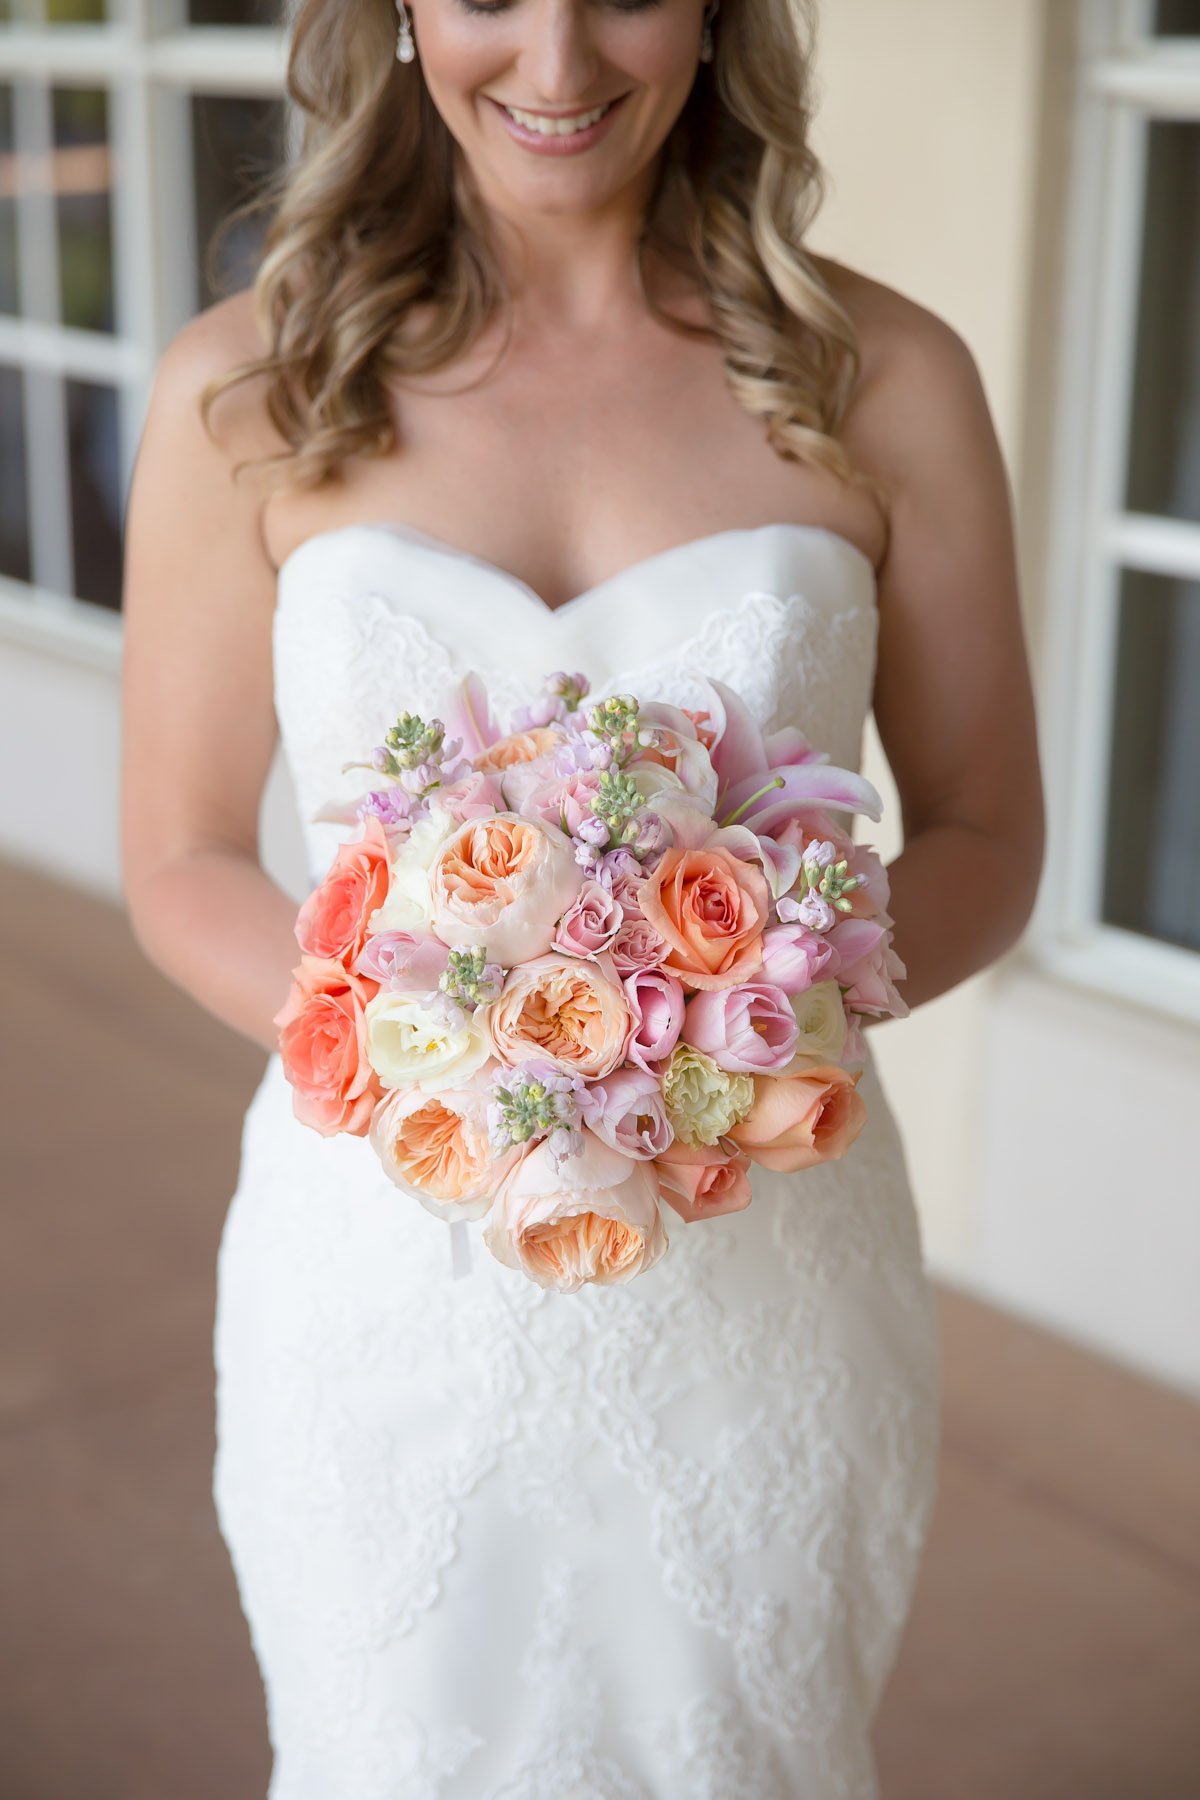 A bride holding a colorful bouquet of flowers